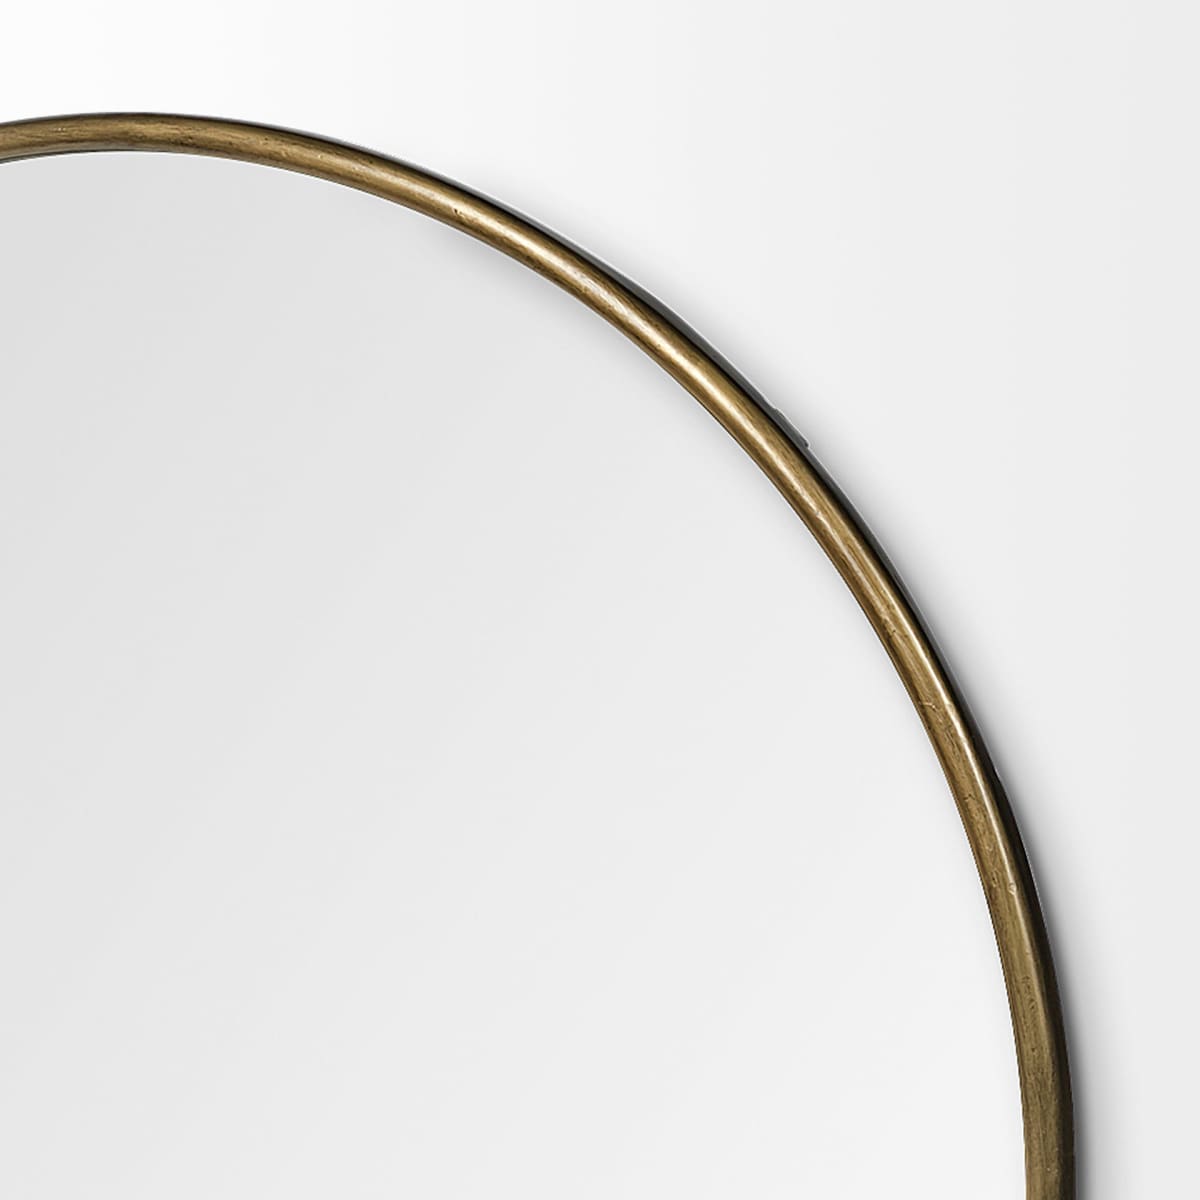 Piper Wall Mirror Gold Metal | 47 - wall-mirrors-grouped